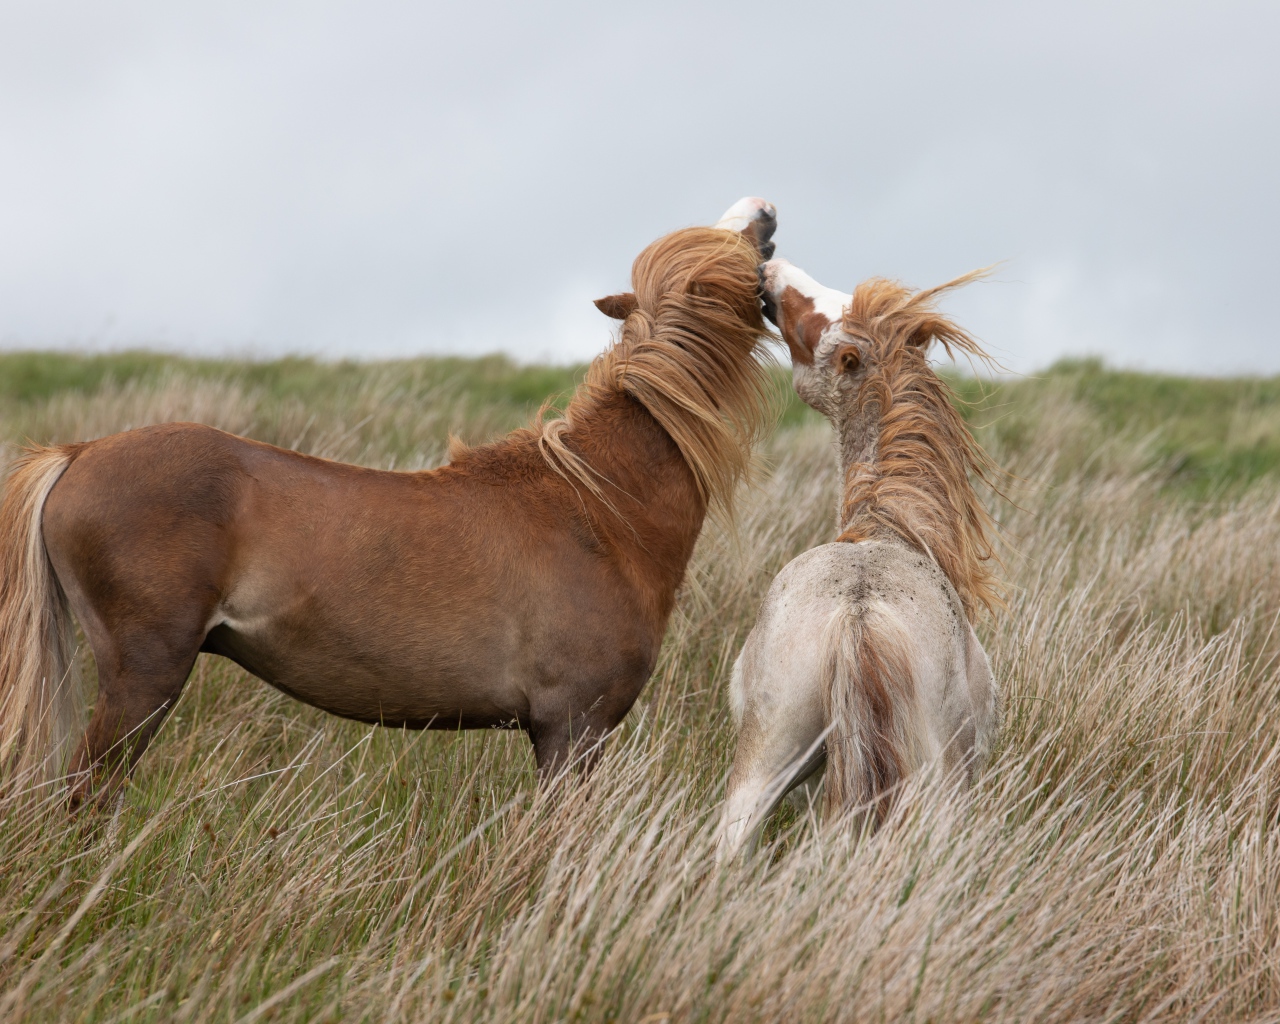 Two horses graze on the grass